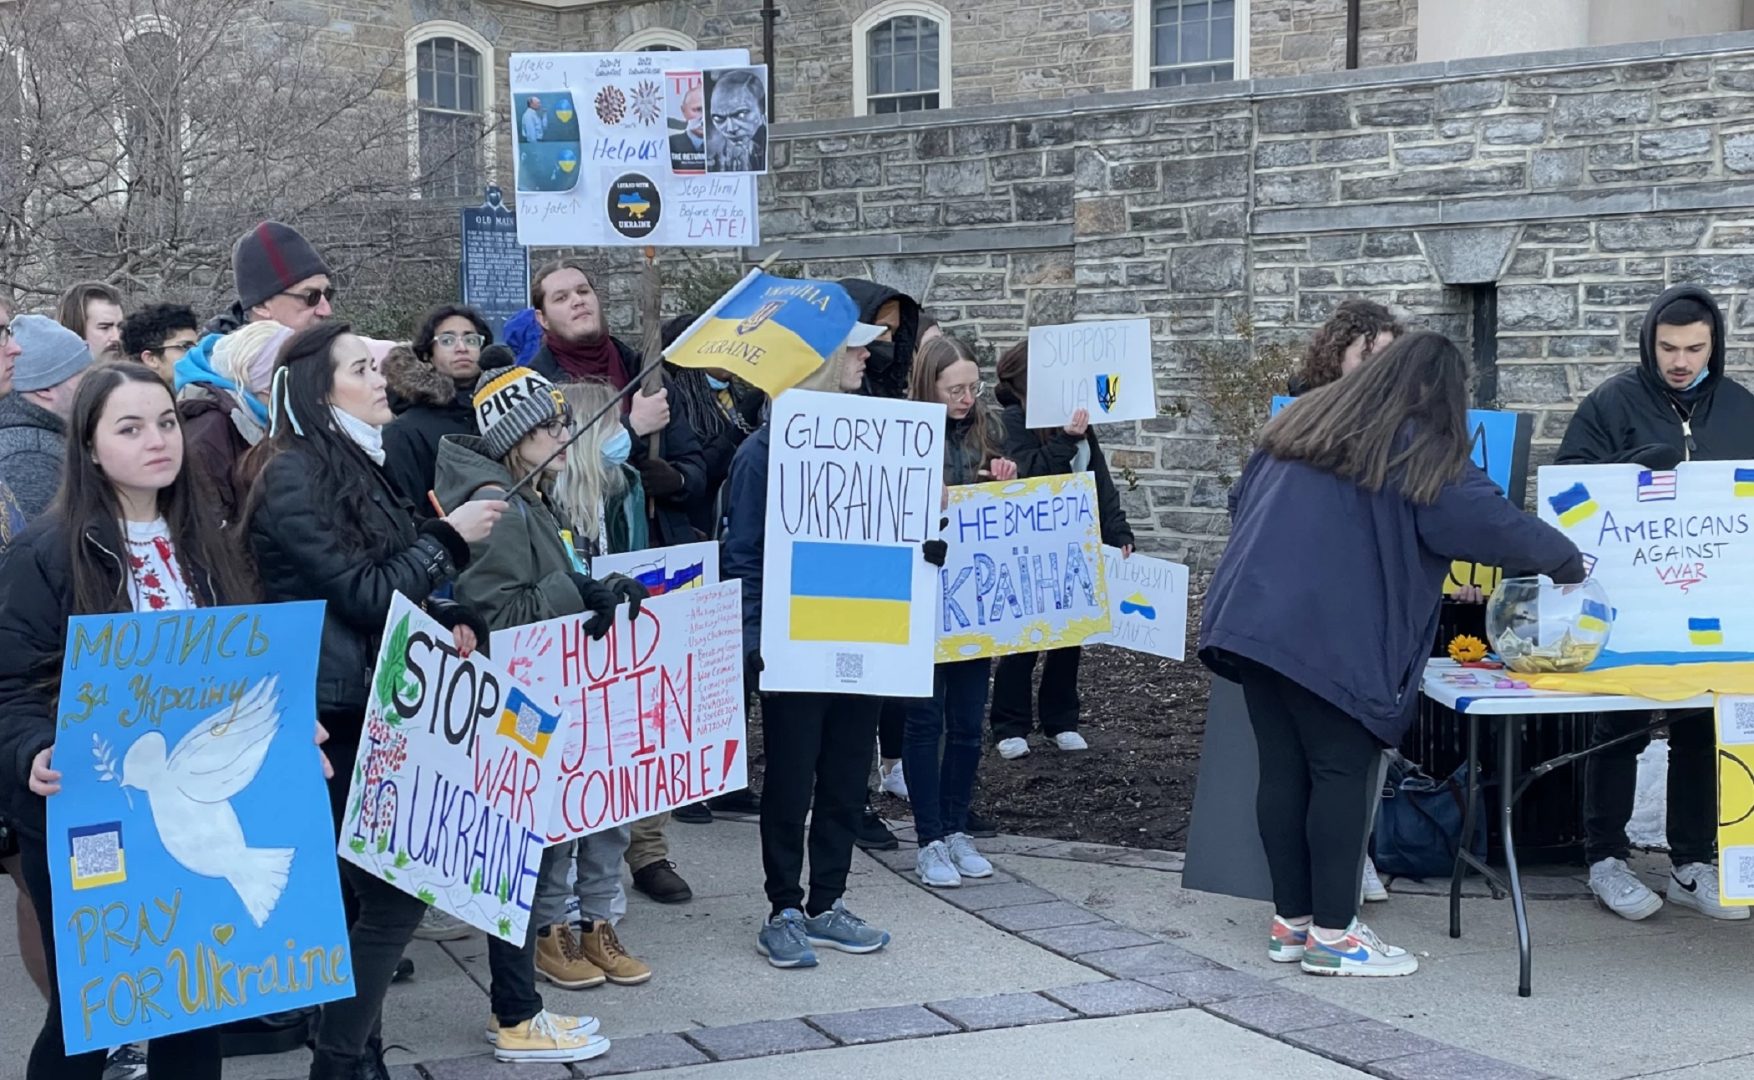 About 100 people gathered by the steps in front of Old Main at Penn State University to stand in solidarity with Ukraine. Chanting, singing and speeches all occurred during the rally on March 4, 2022.